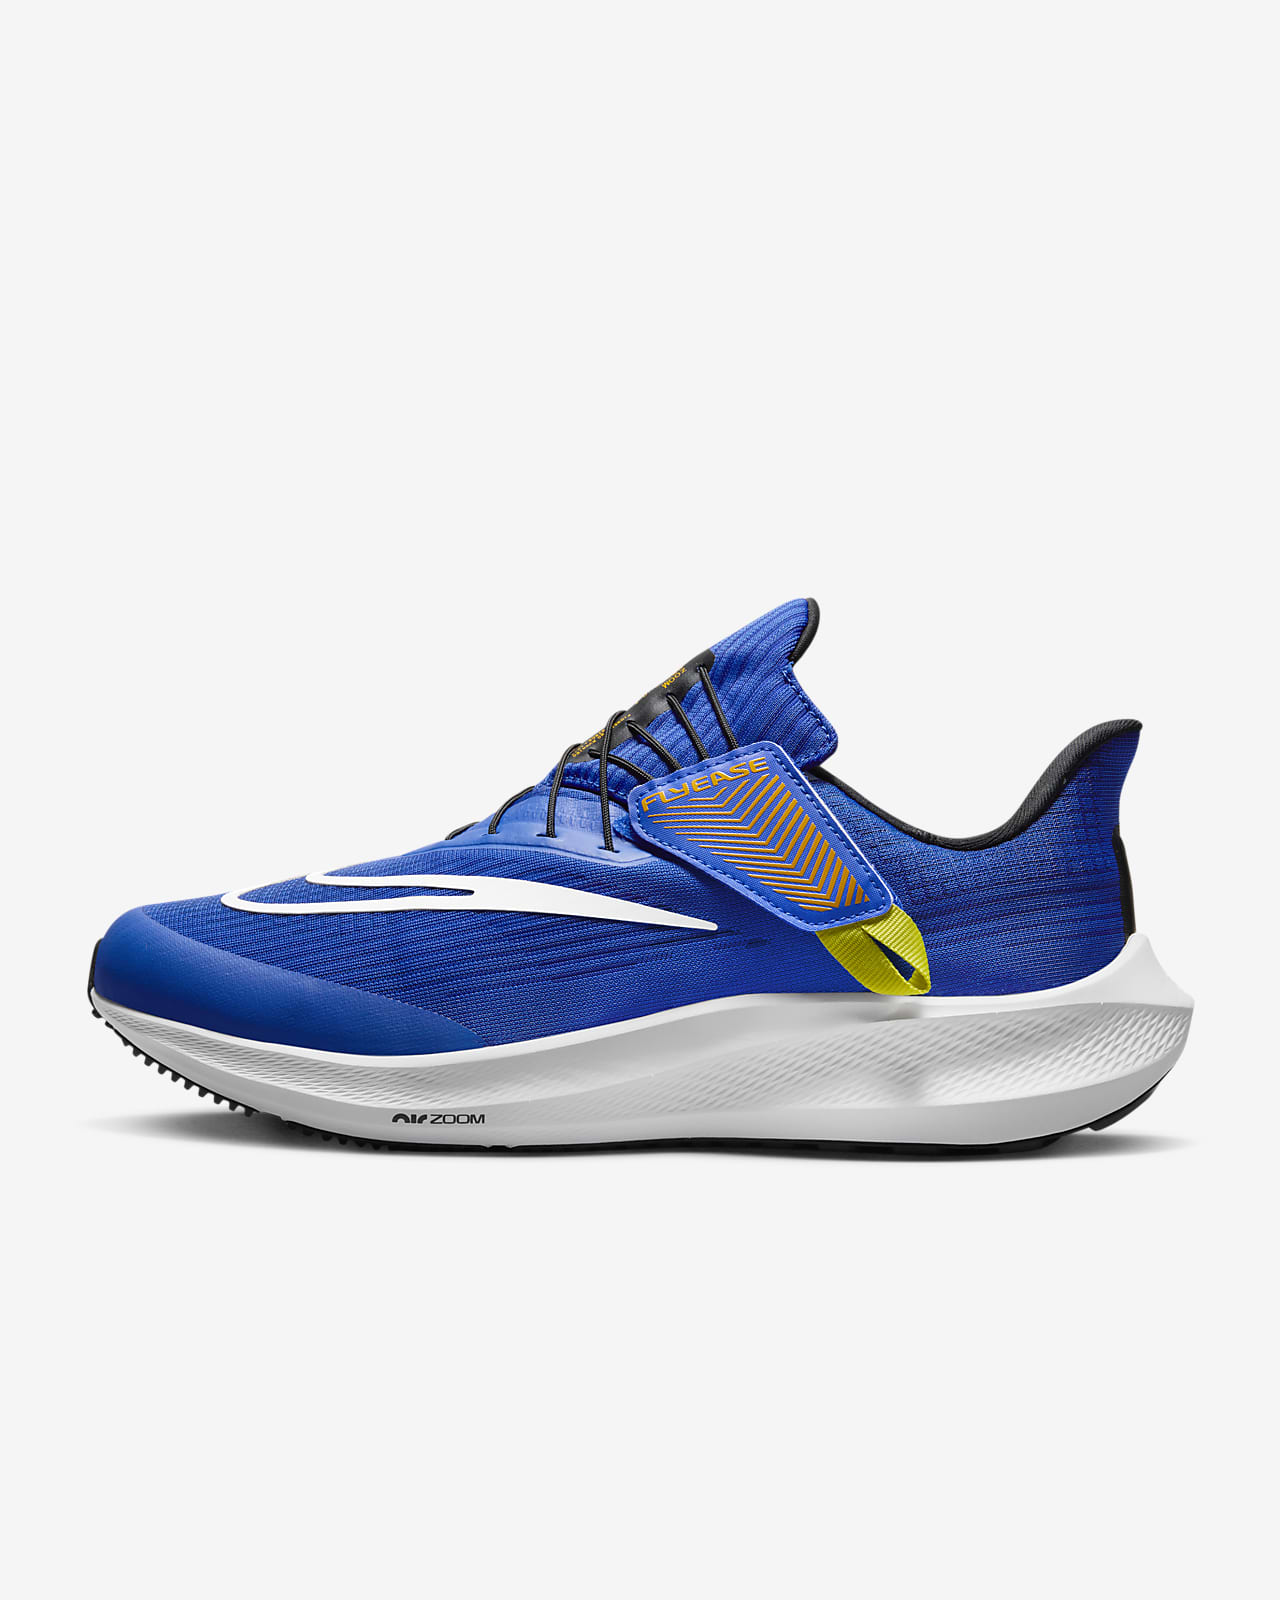 Culpable Hospitalidad picar Nike Pegasus FlyEase Men's Easy On/Off Road Running Shoes (Extra Wide). Nike .com